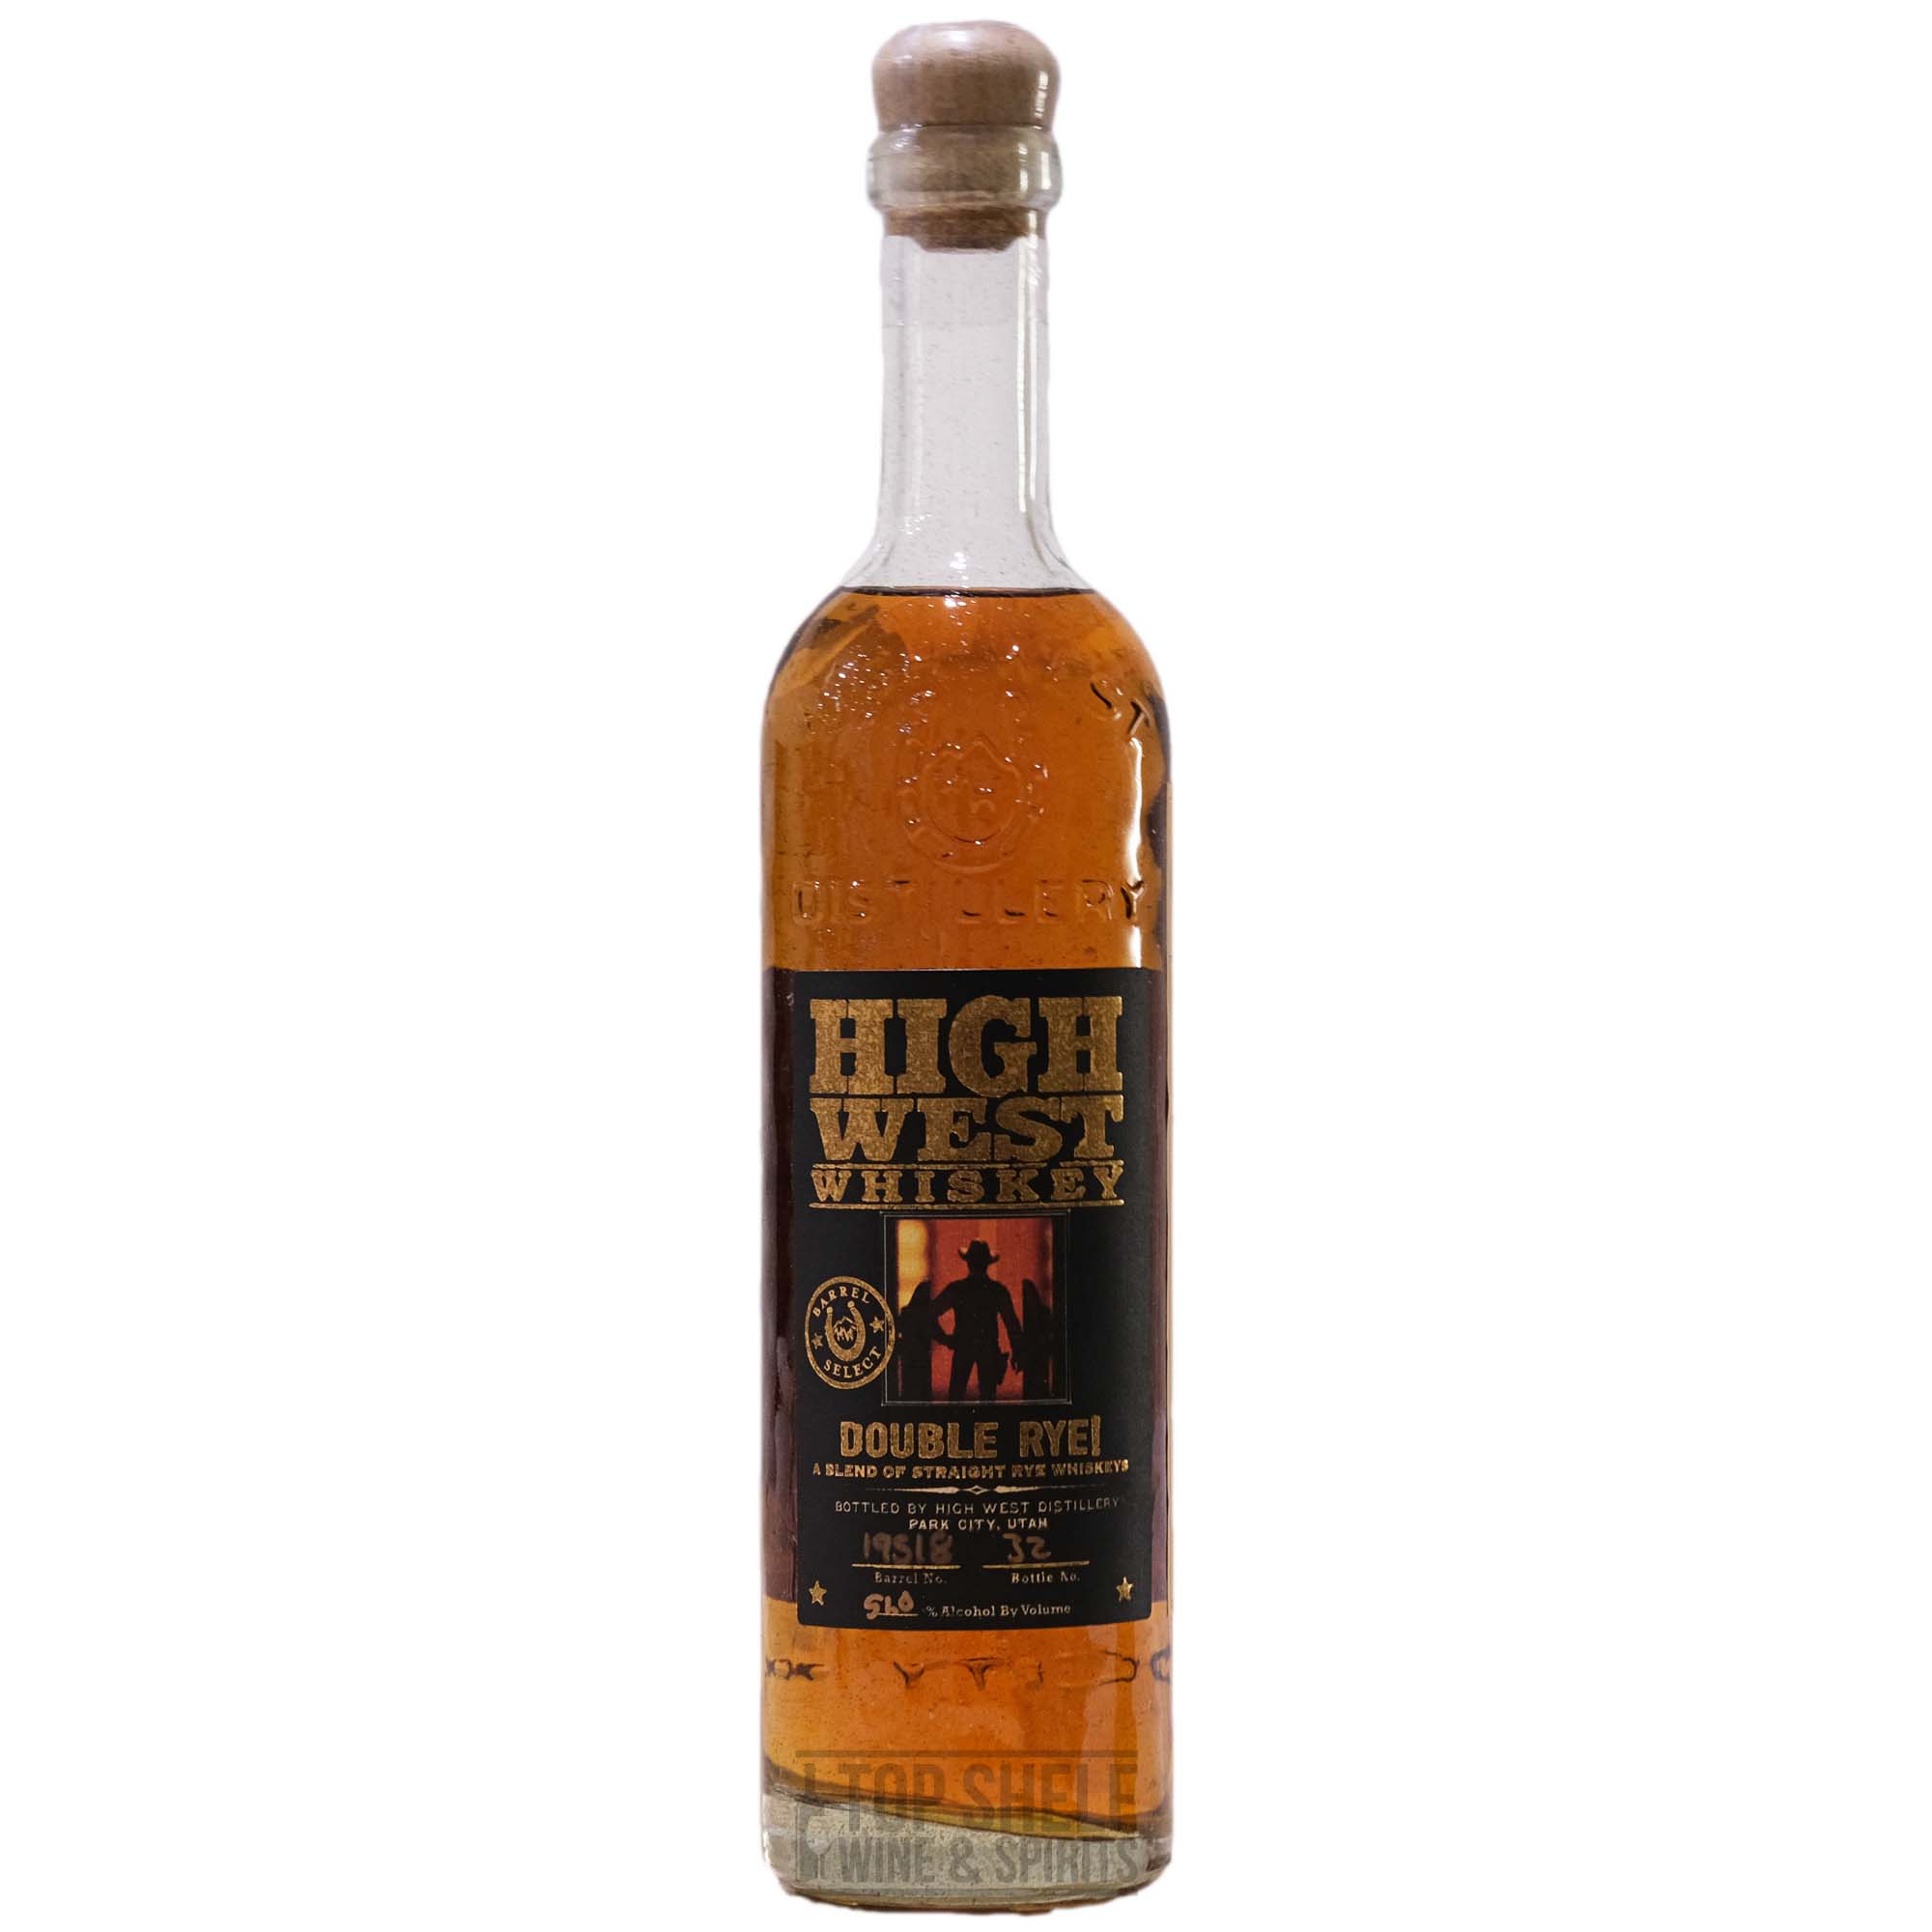 High West Double Rye! Whiskey Aged in Aquavit Barrels (Private Selection)